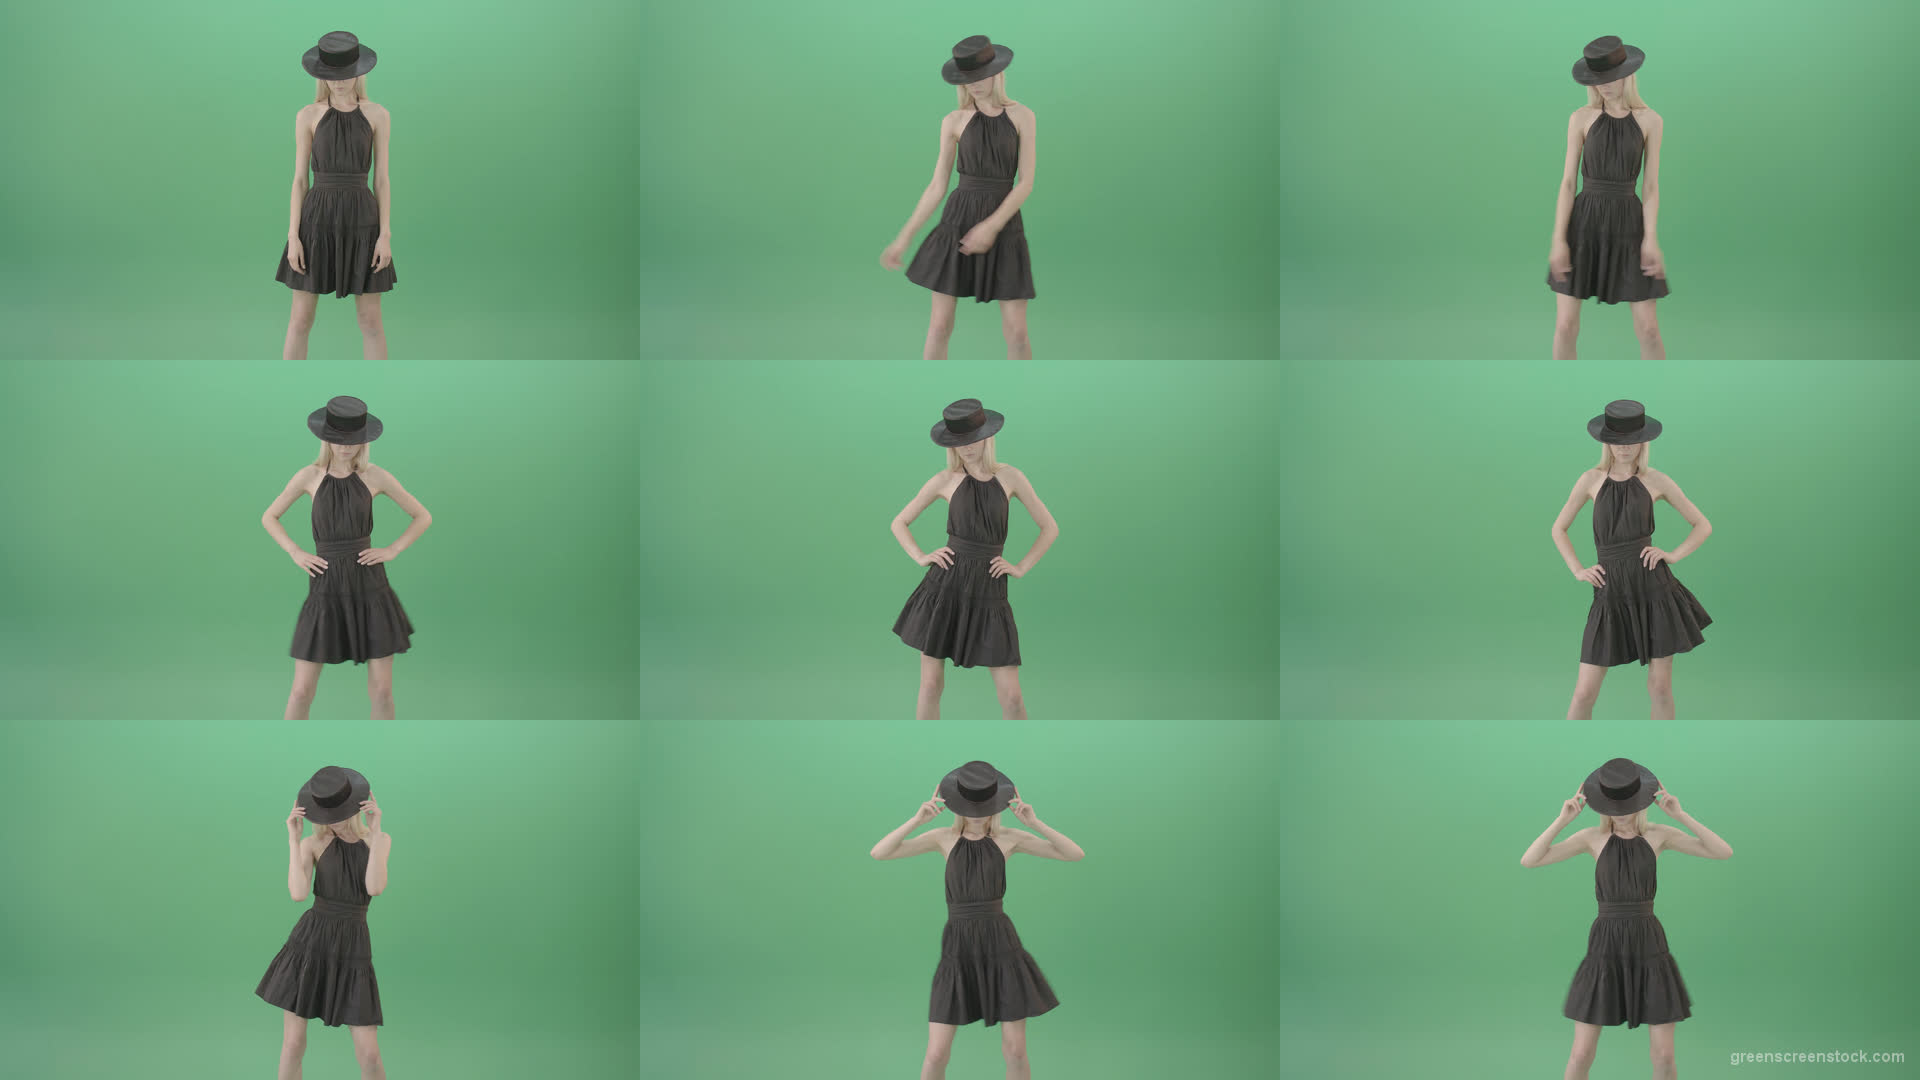 Elegant-girl-in-black-dress-and-hat-chilling-dance-isolated-on-green-screen-4K-Video-Footage-1920 Green Screen Stock